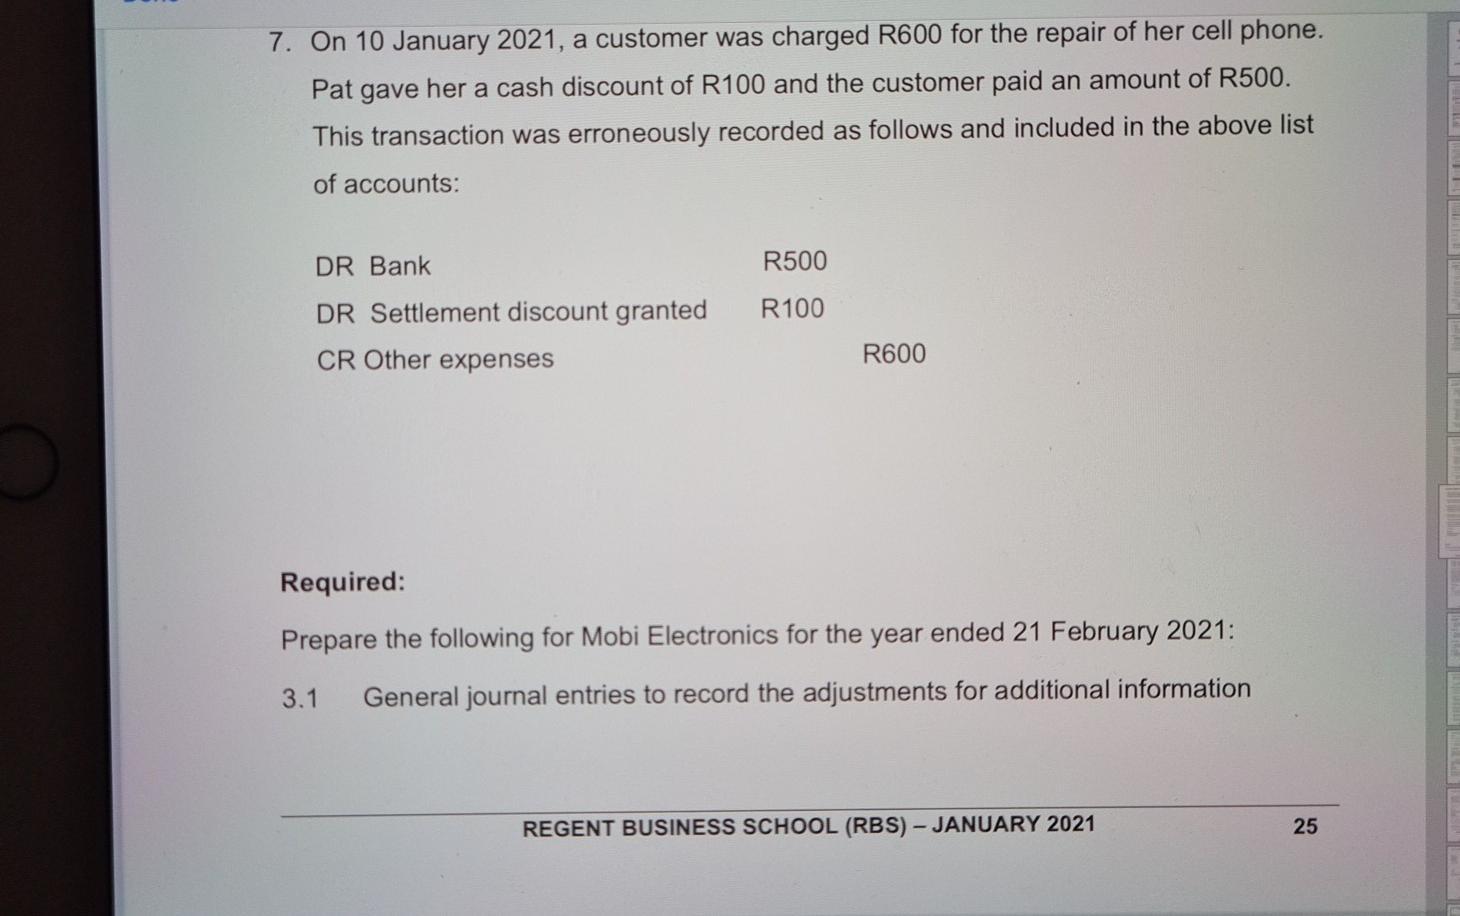 7. On 10 January 2021, a customer was charged R600 for the repair of her cell phone. Pat gave her a cash discount of R100 and